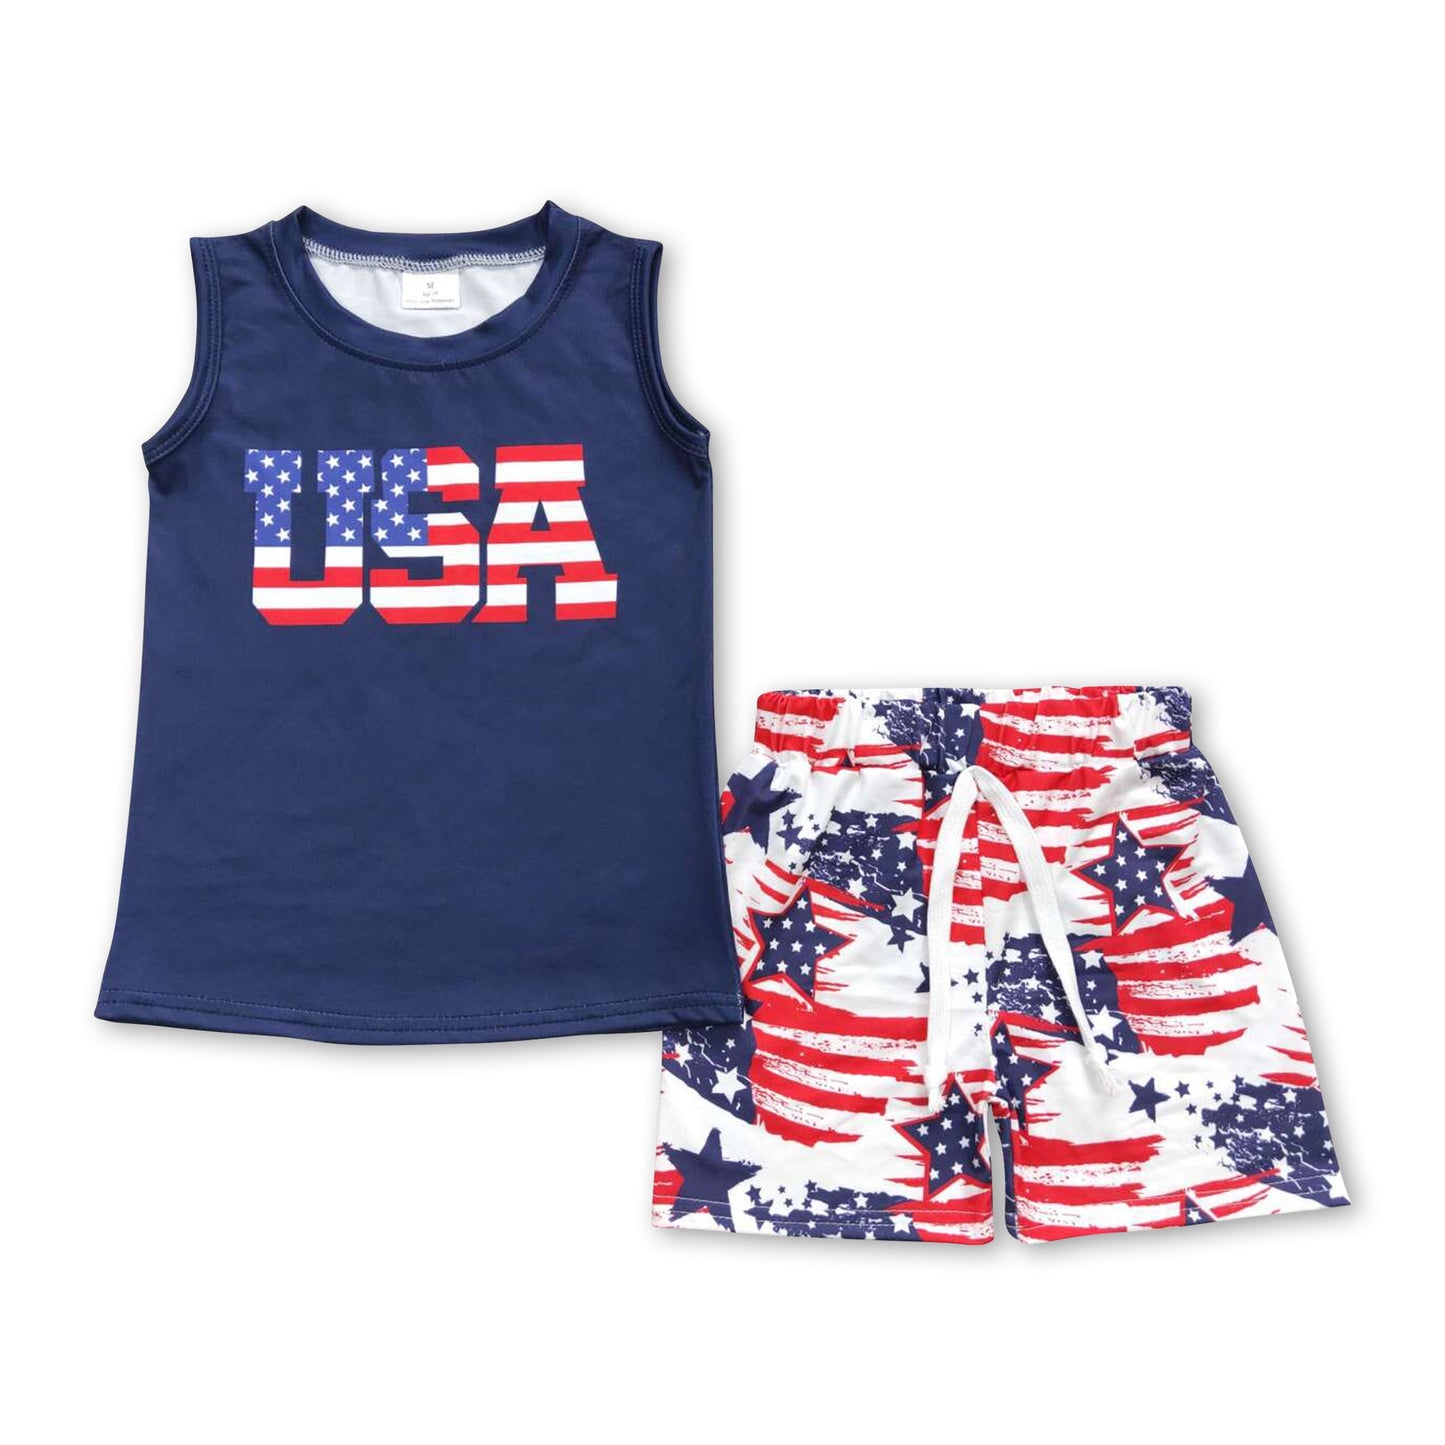 USA top flag shorts boys 4th of july outfits